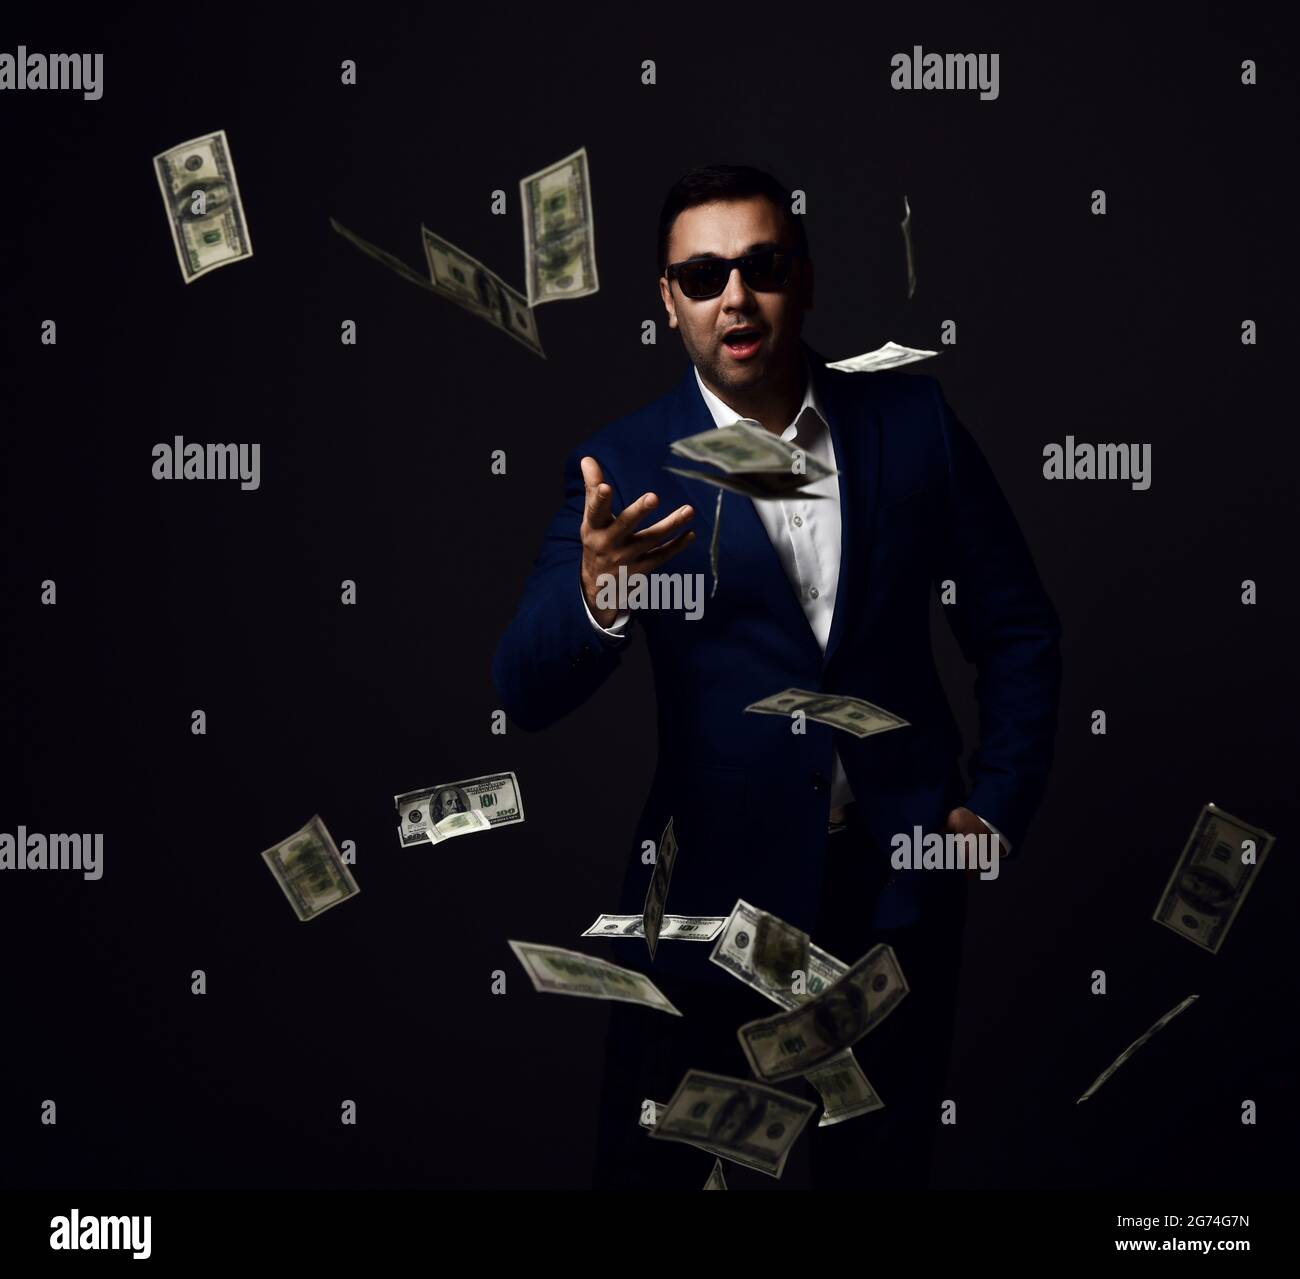 Portrait of rich successful businessman in blue jacket and sunglasses standing throwing dollars cash at camera Stock Photo